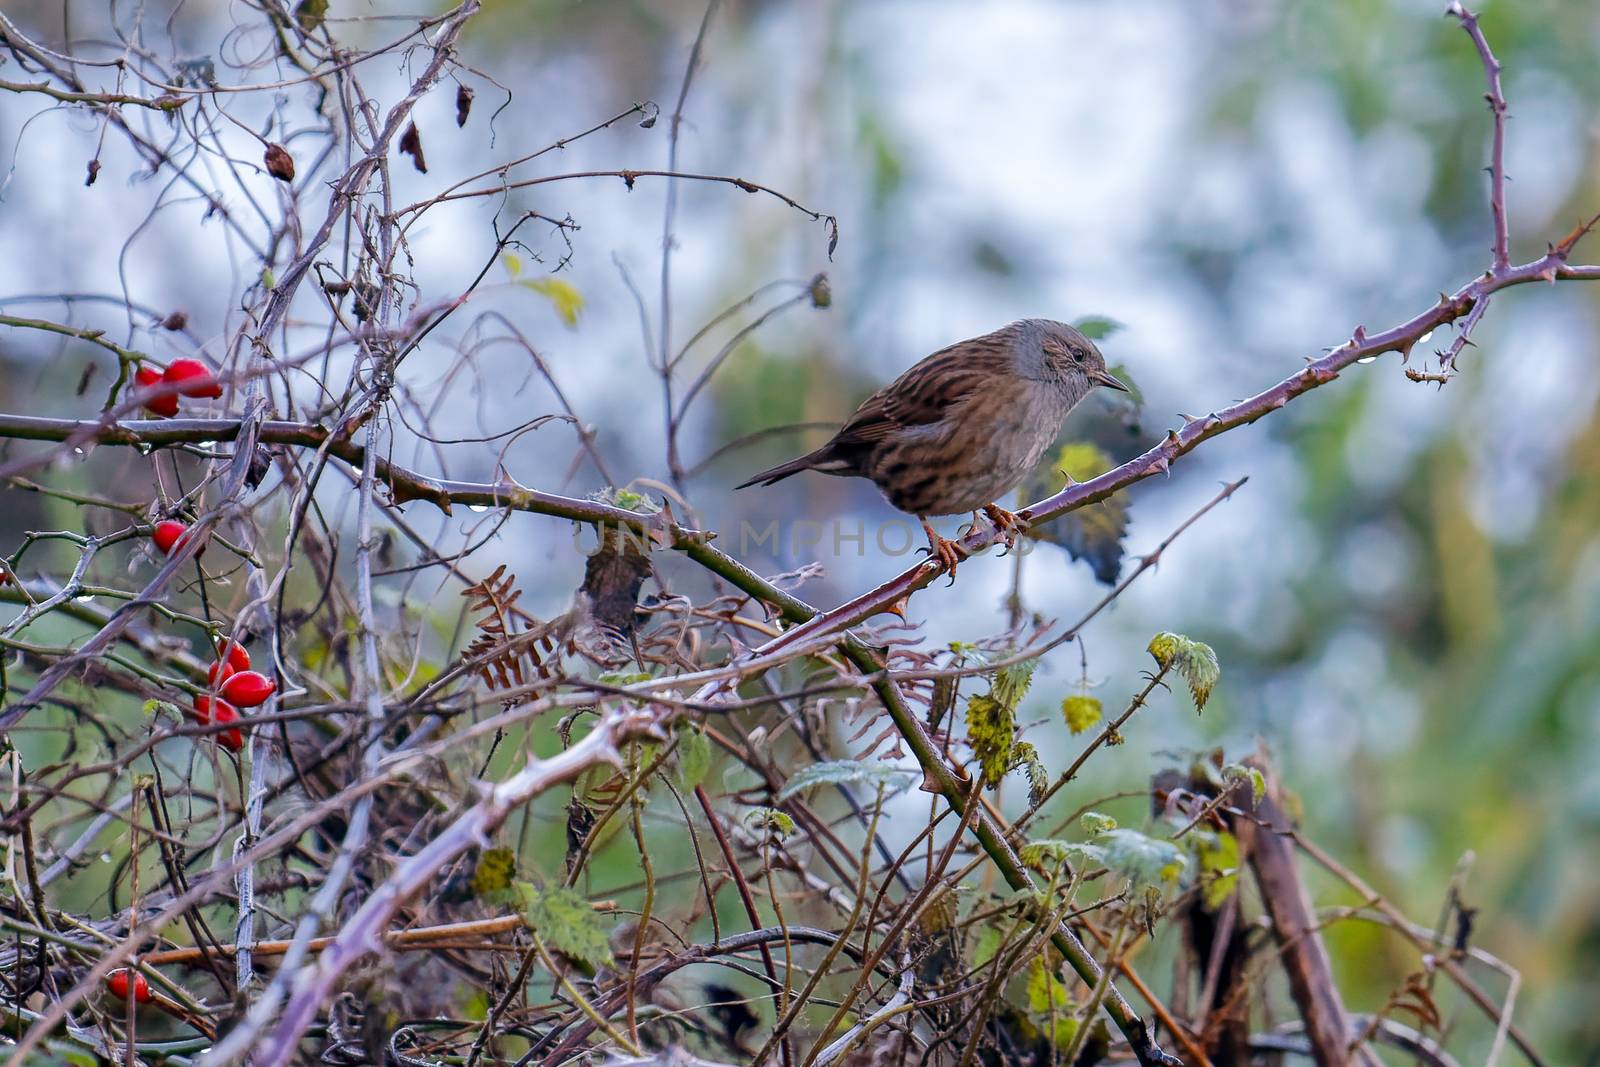 Hedge Accentor or Dunnock on a briar in winter by phil_bird